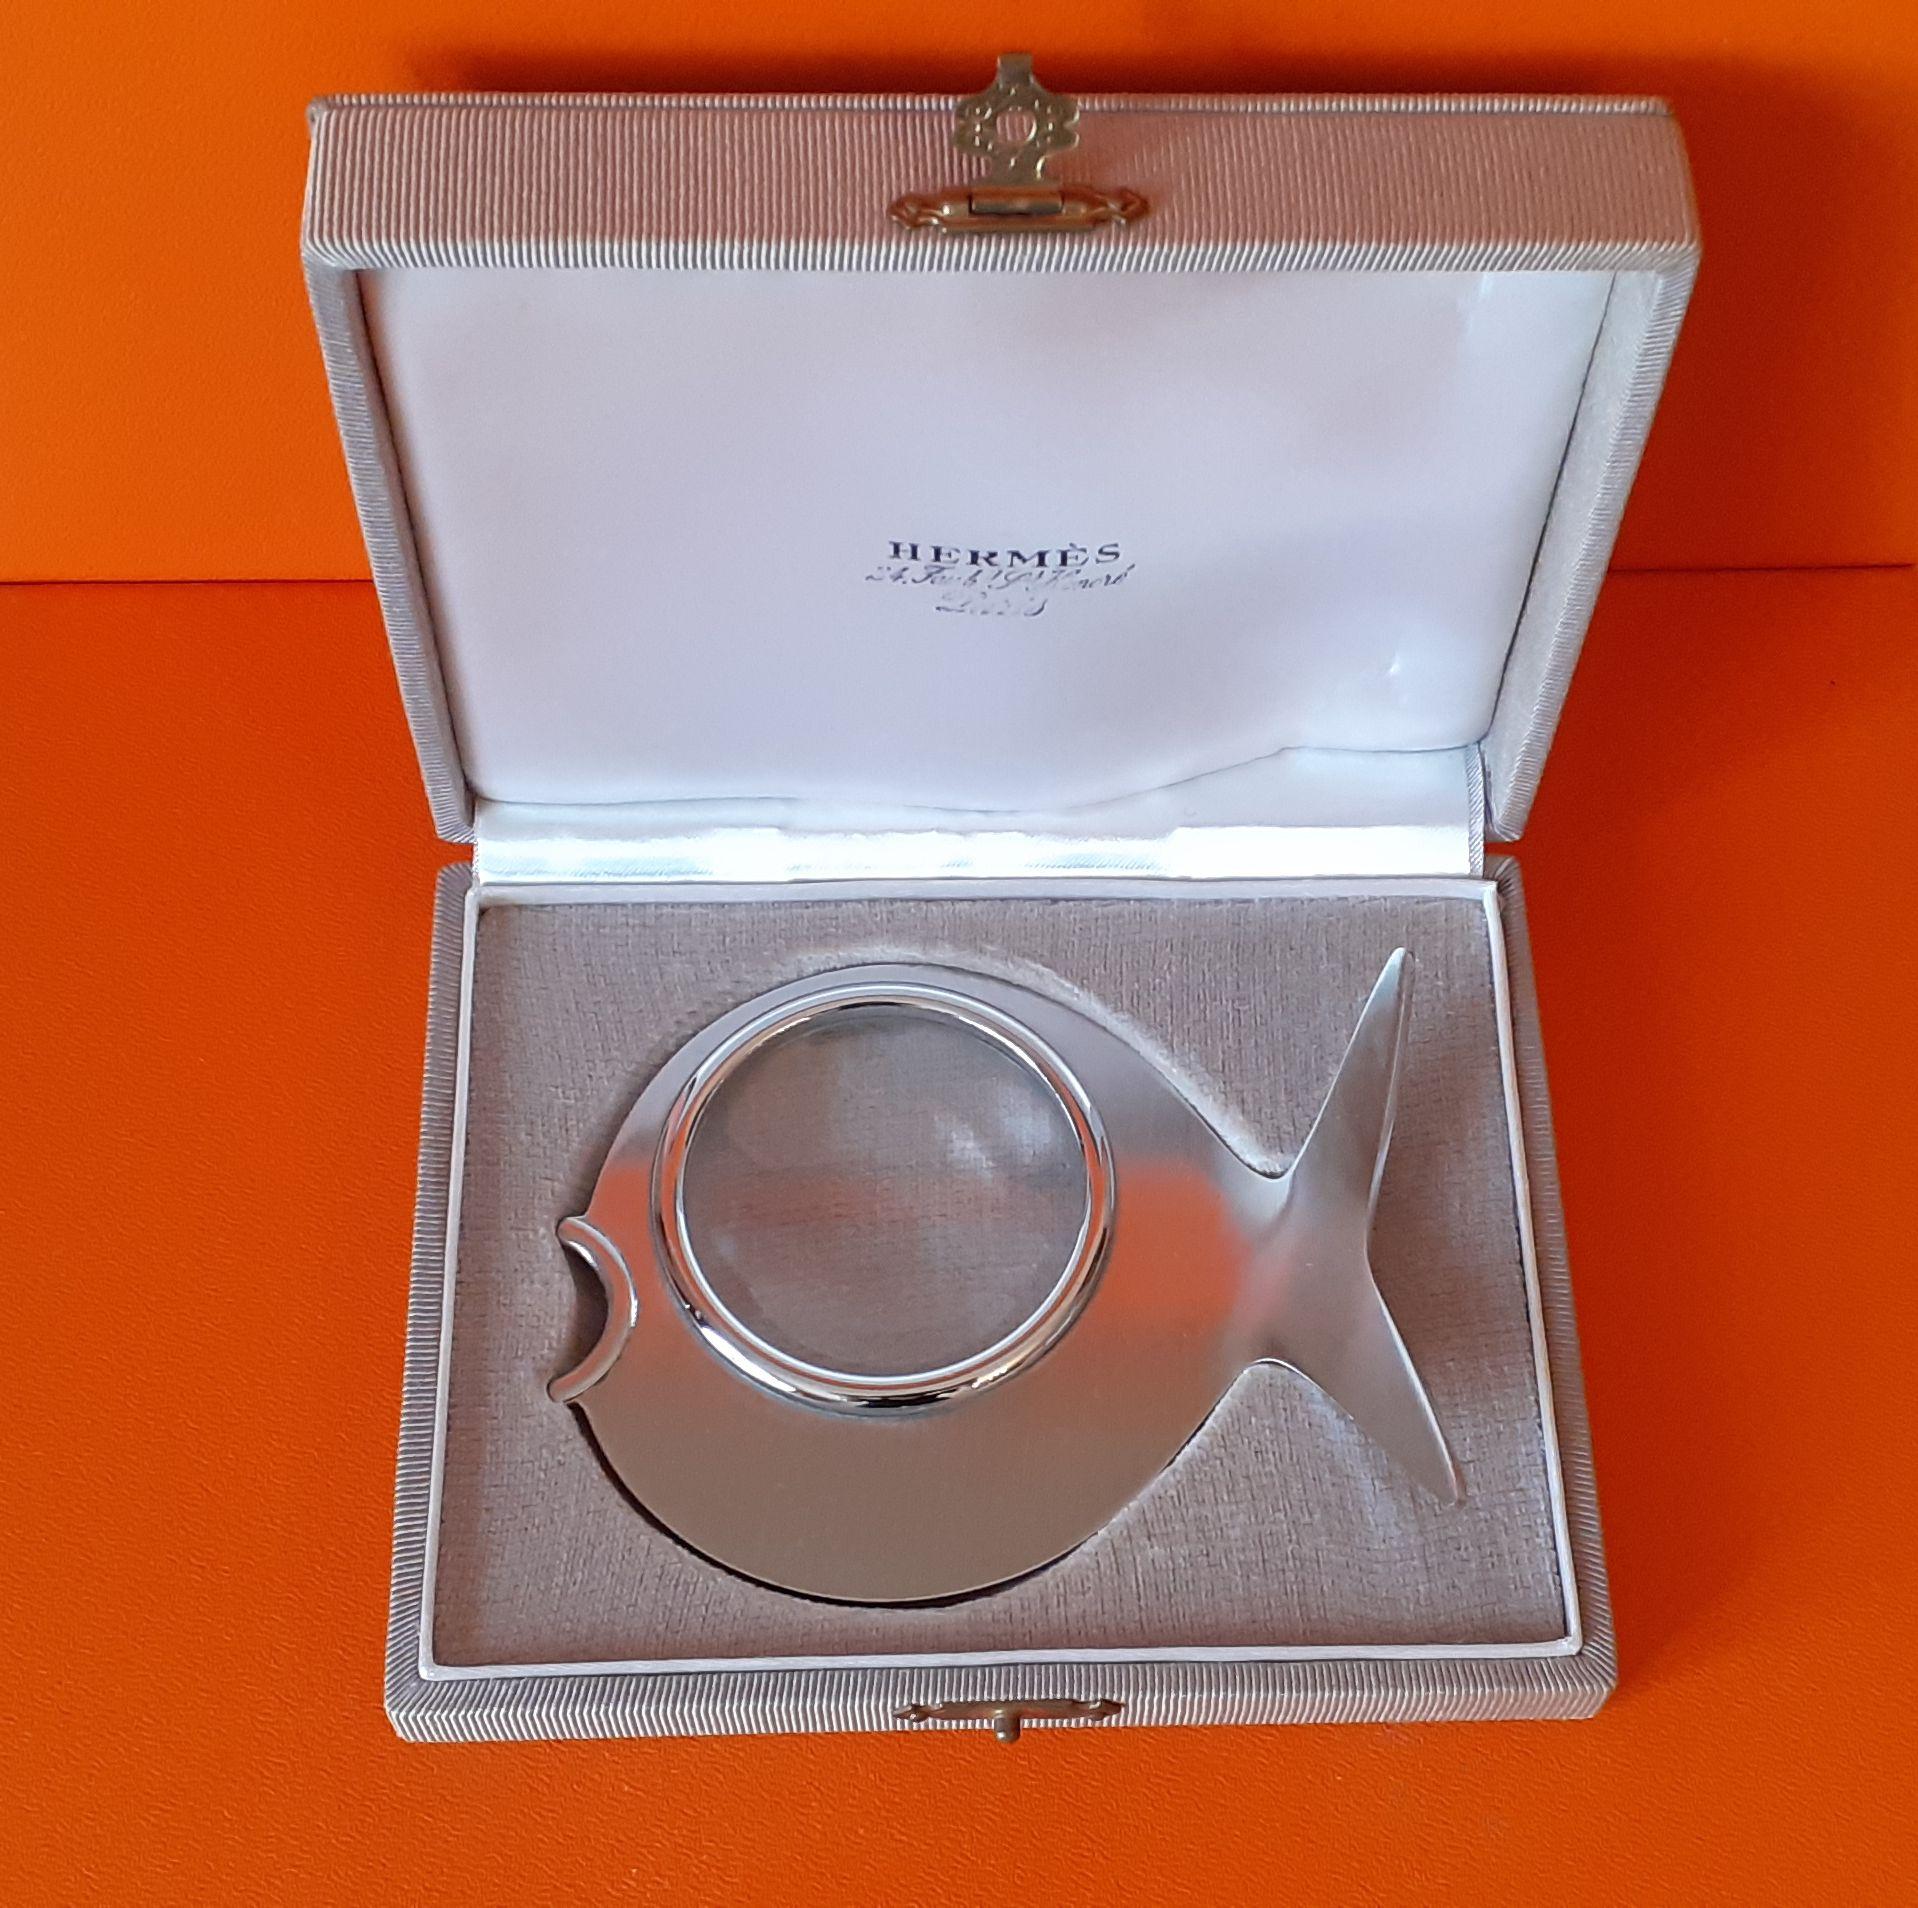 Rare Authentic Hermès Magnyfying Glass

Shaped as a cute fish

Its eye is a magnifying glass, and its tail is raised (original shape)

Made of brushed silver-tone metal (non precious) 

